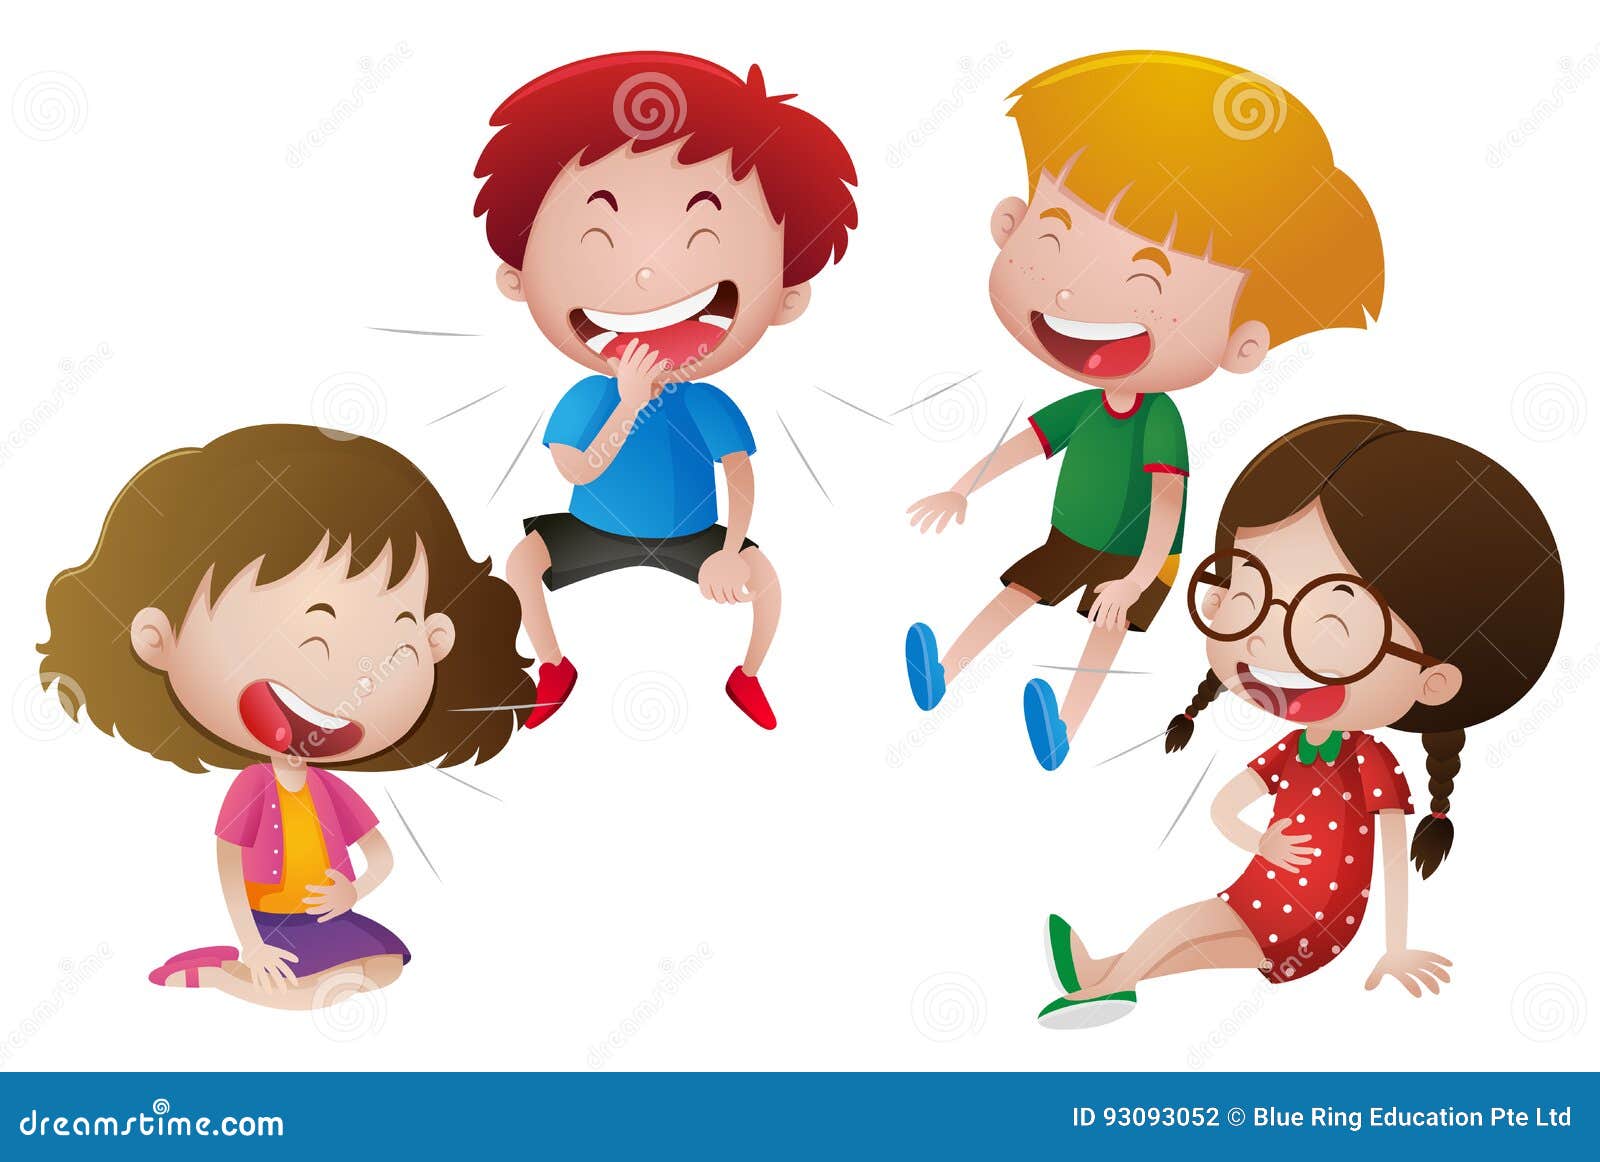 Boys and girls laugh stock vector. Illustration of drawing - 93093052